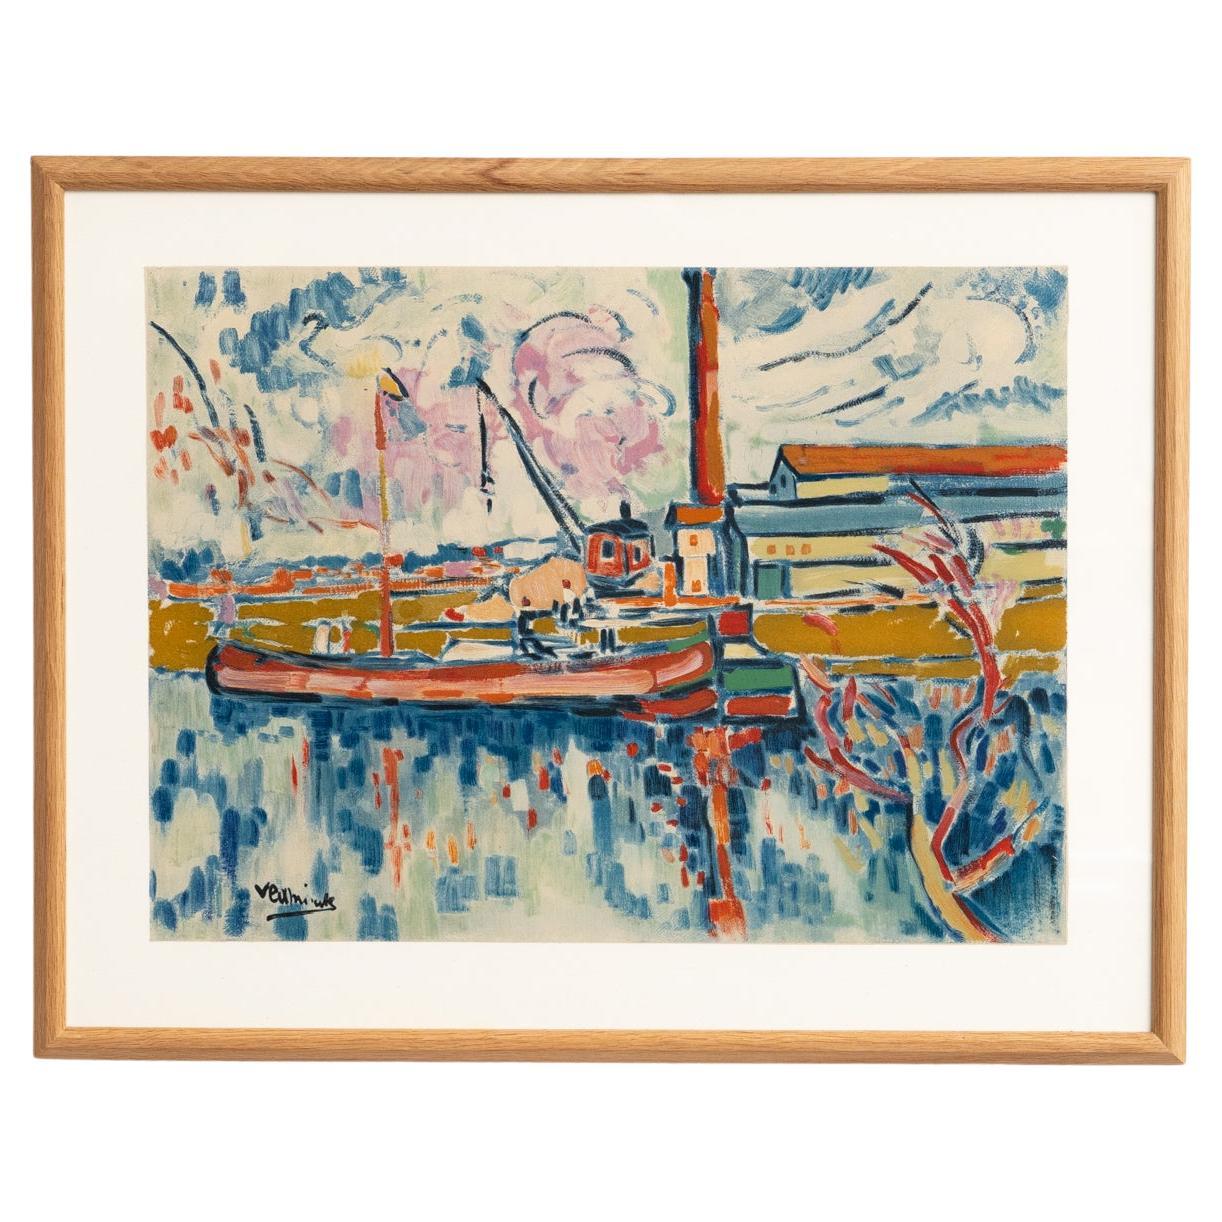 Vlaminck Framed 'Siene a Chatou' Color Lithography, circa 1972 For Sale